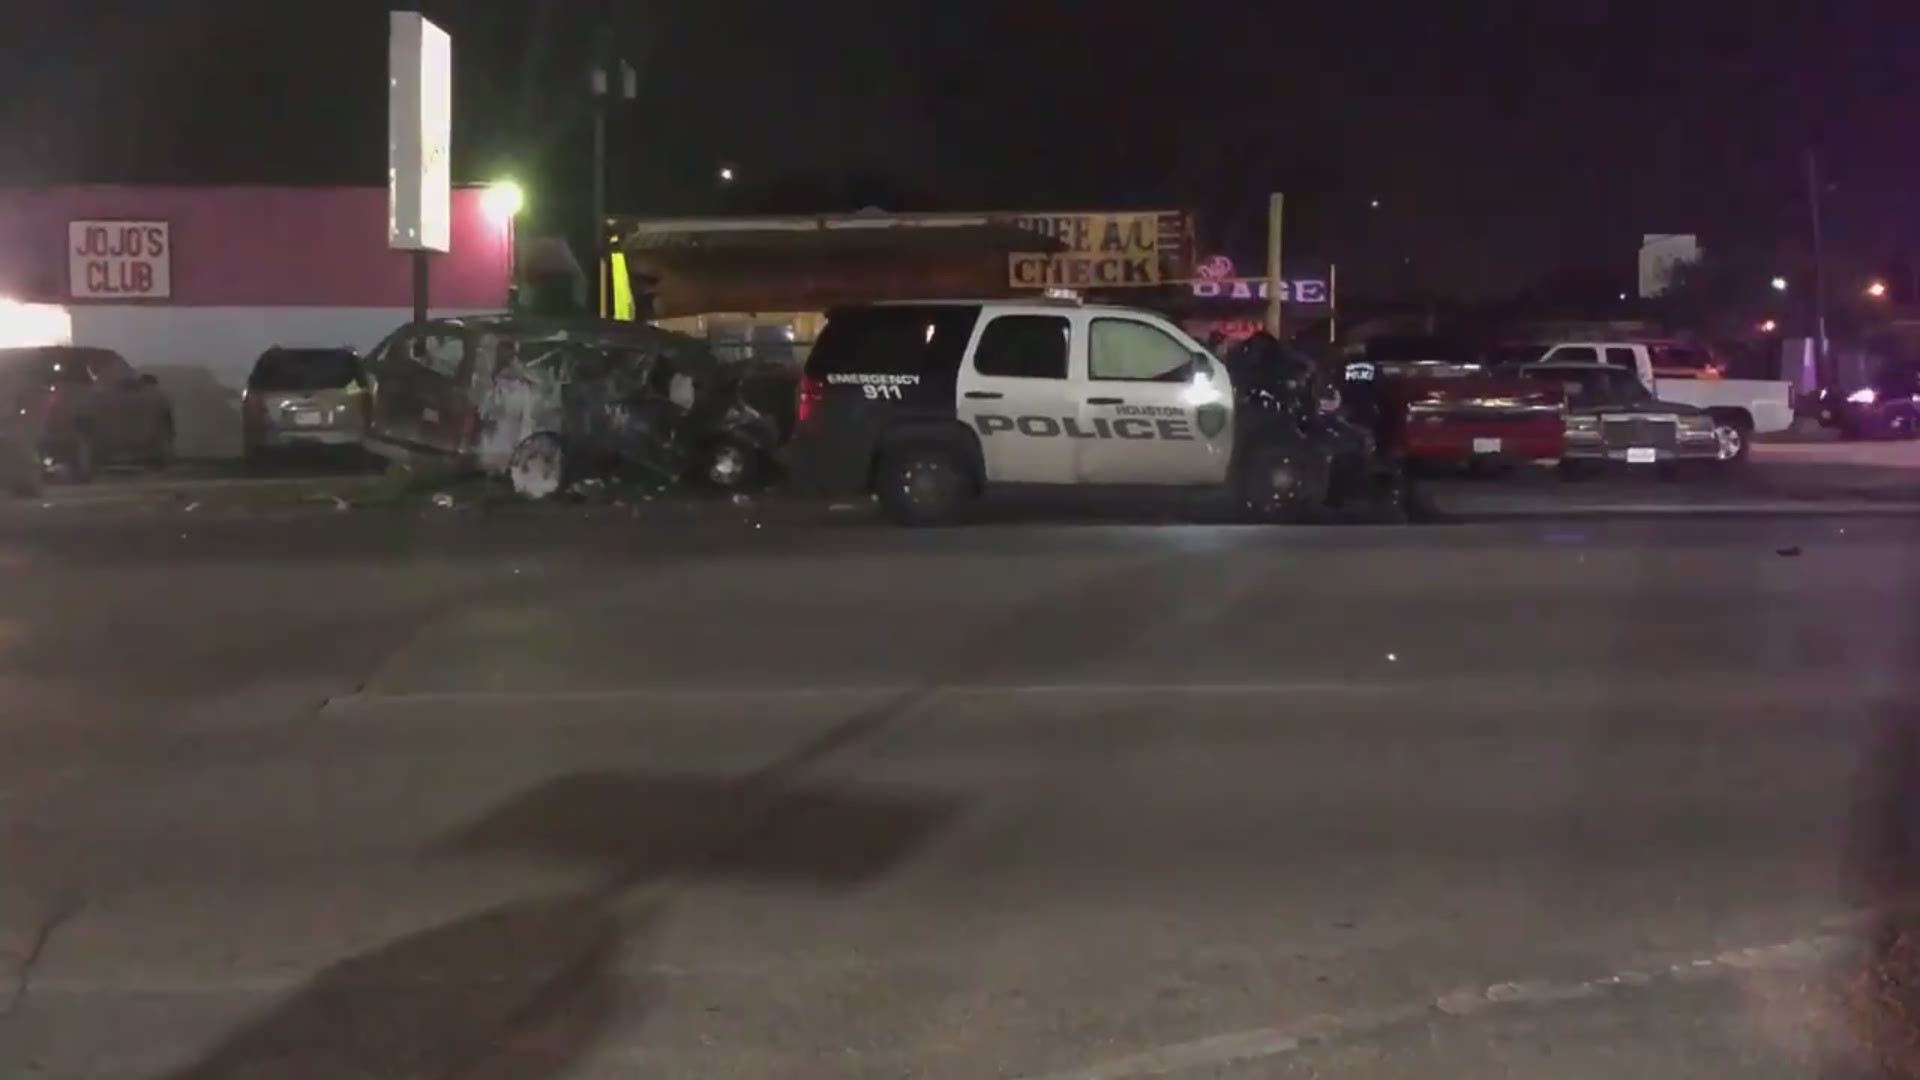 A Houston Police officer and one other person were injured Saturday night in a crash in southeast Houston.